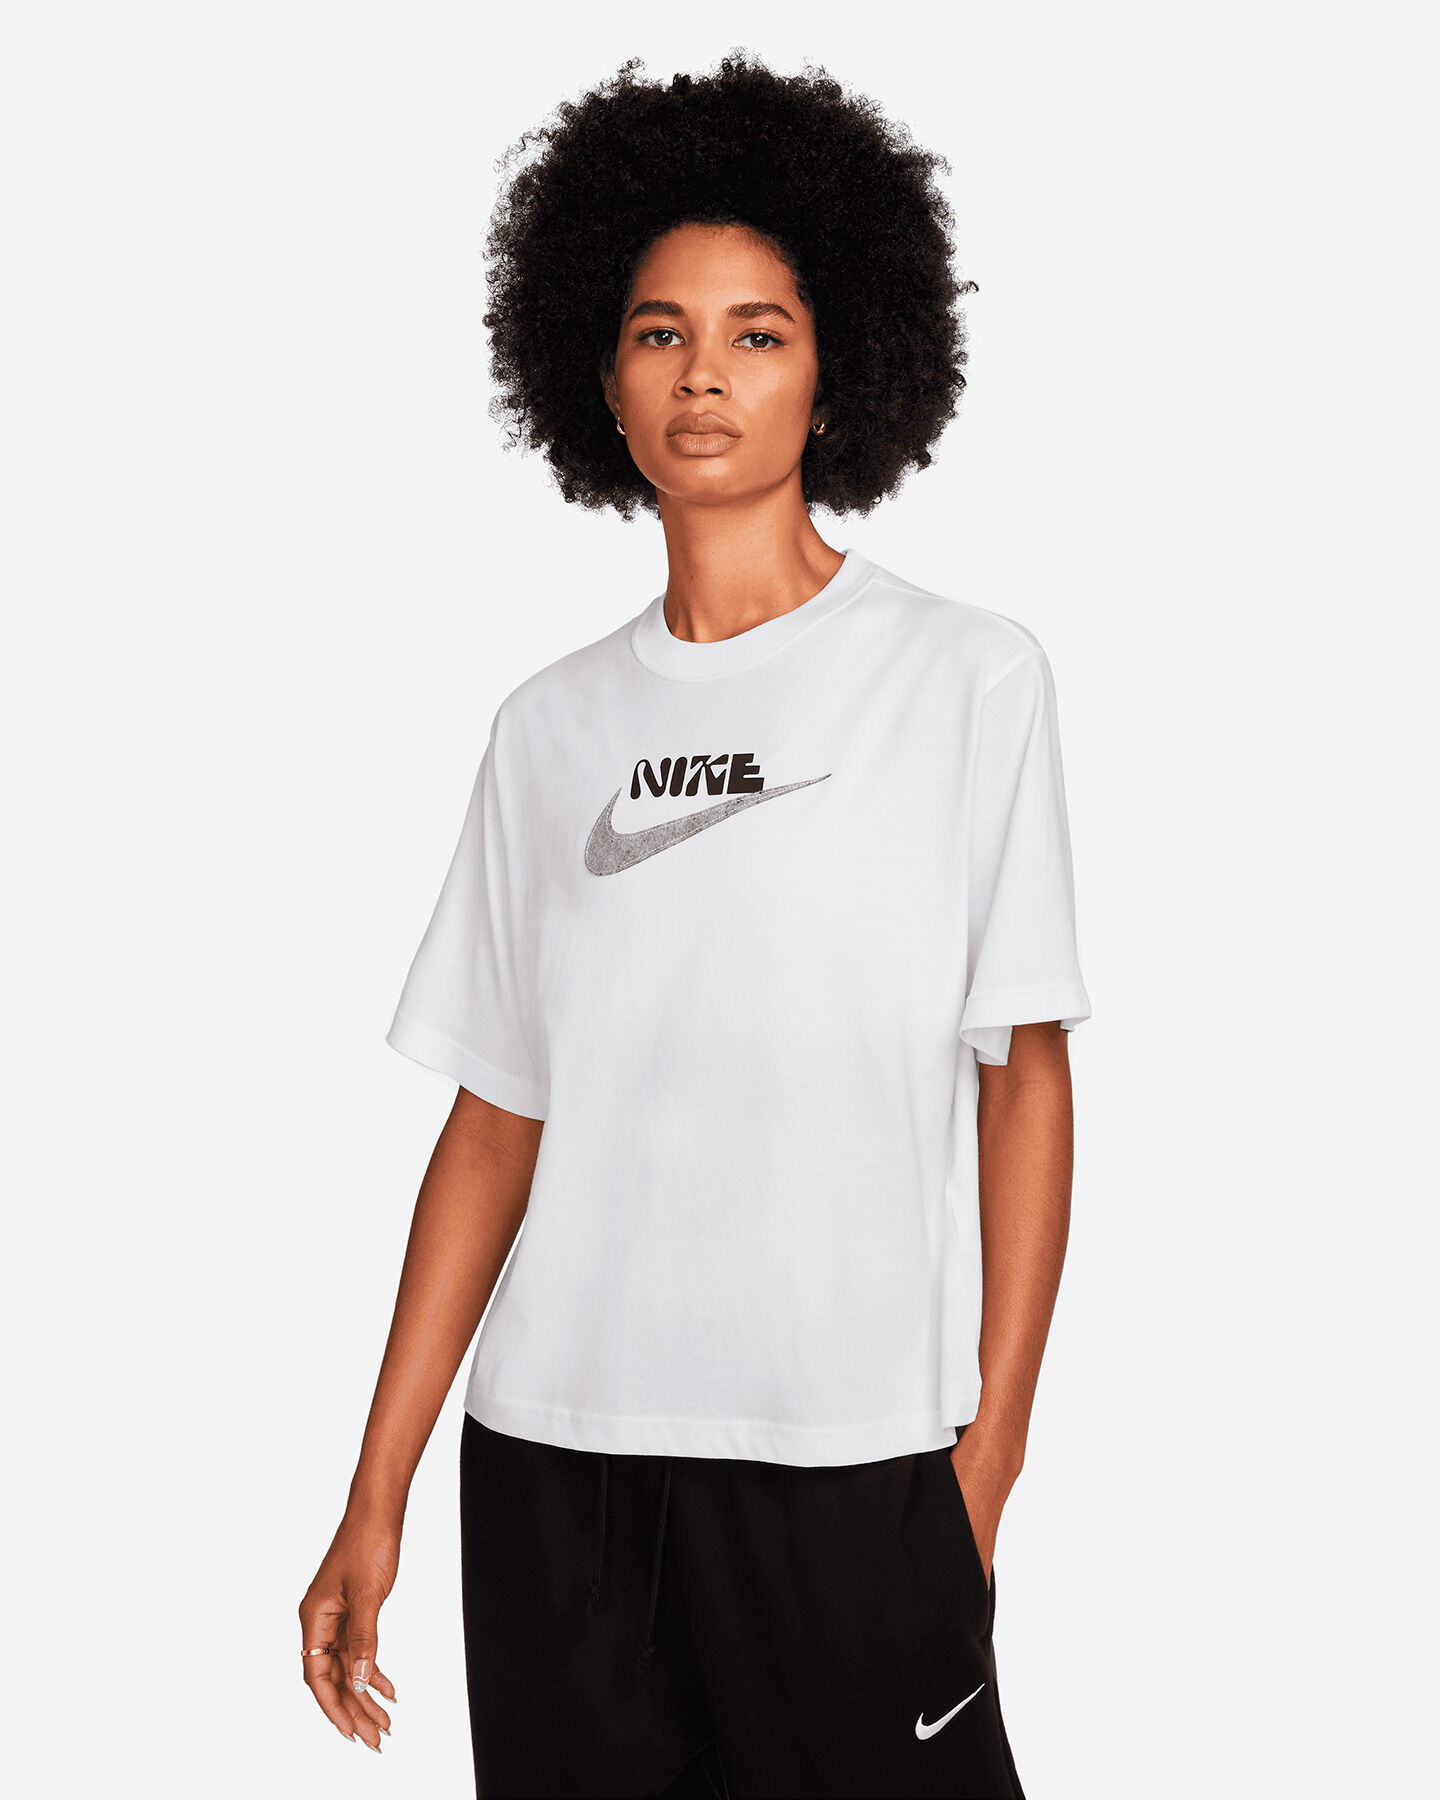  T-Shirt NIKE GRAPHIC BLOGO W S5458102|100|M scatto 0